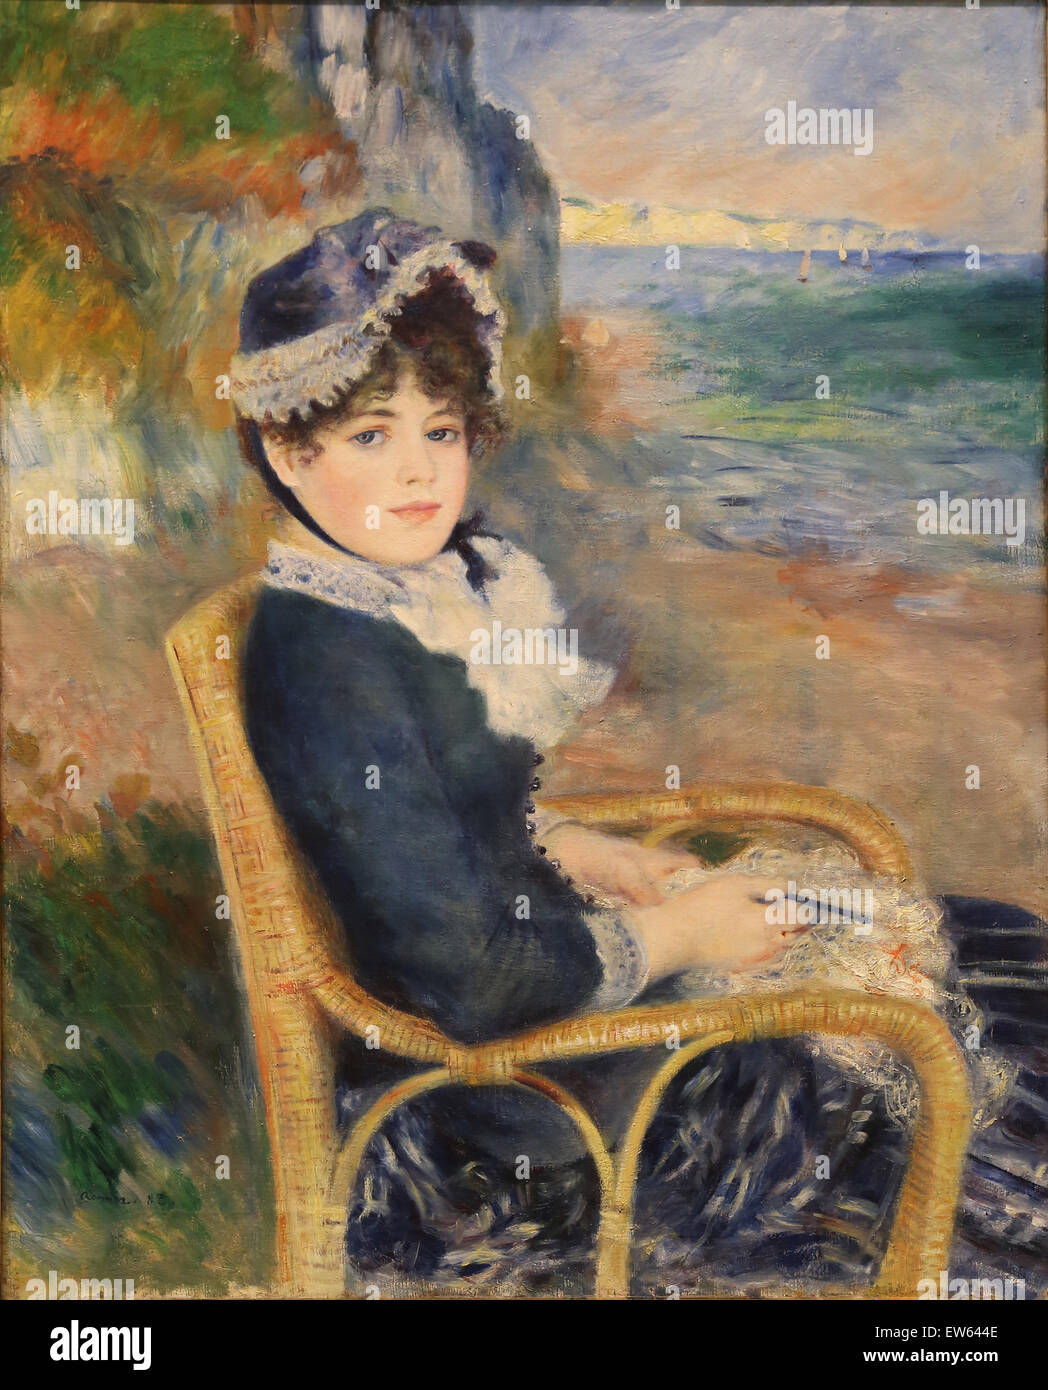 Auguste Renoir (1841-1919).  French painter. By the Seashore, 1883. Oil on canvas. Metropolitan Museum of Art. Ny. USA. Stock Photo